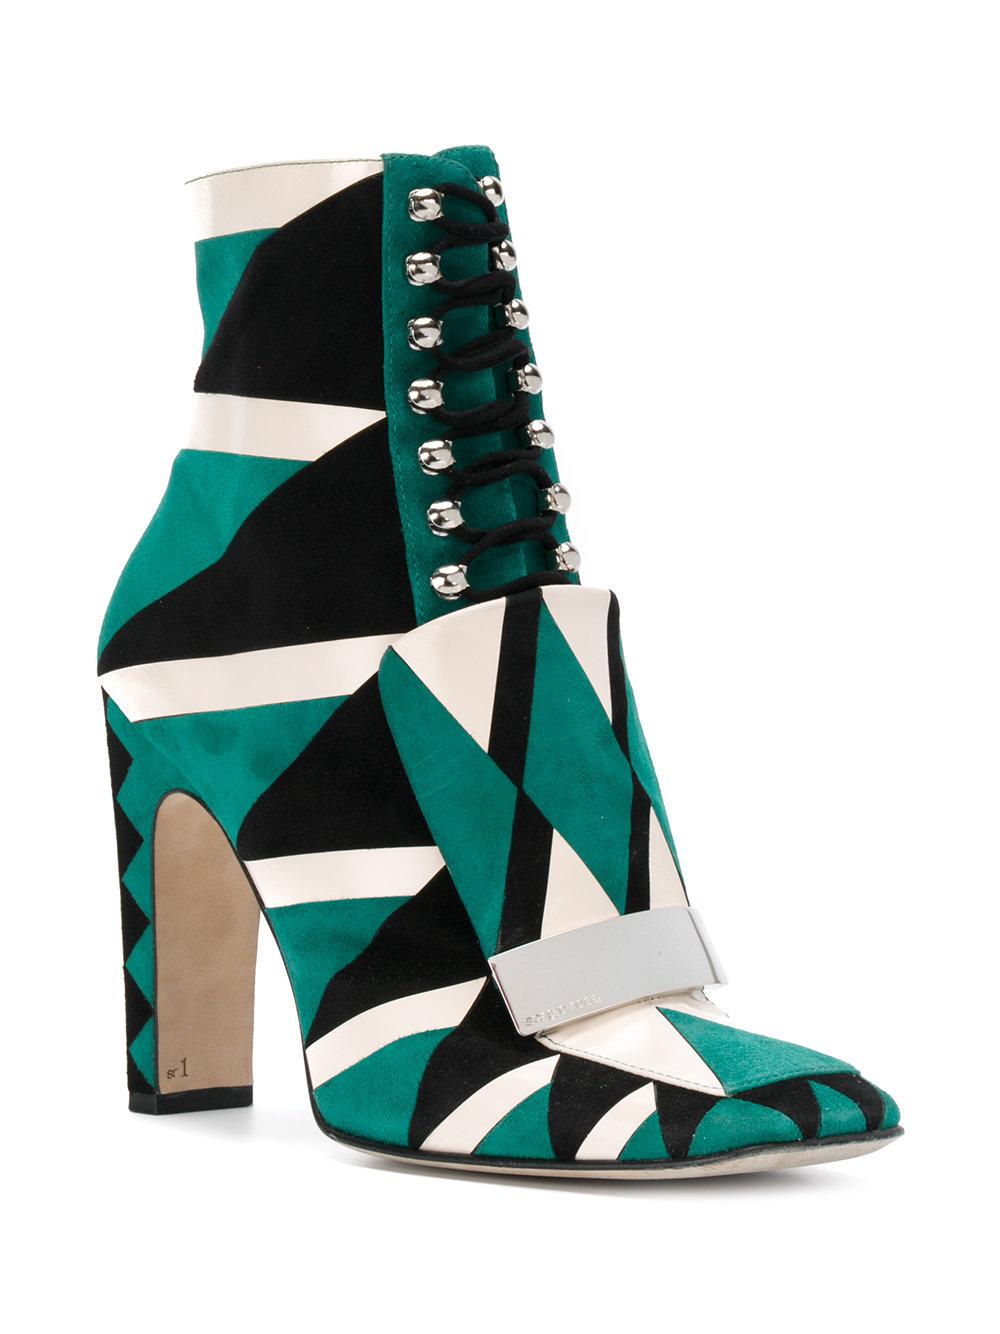 Lyst - Sergio Rossi Sr1 Lace Up Graphic Boot in Green